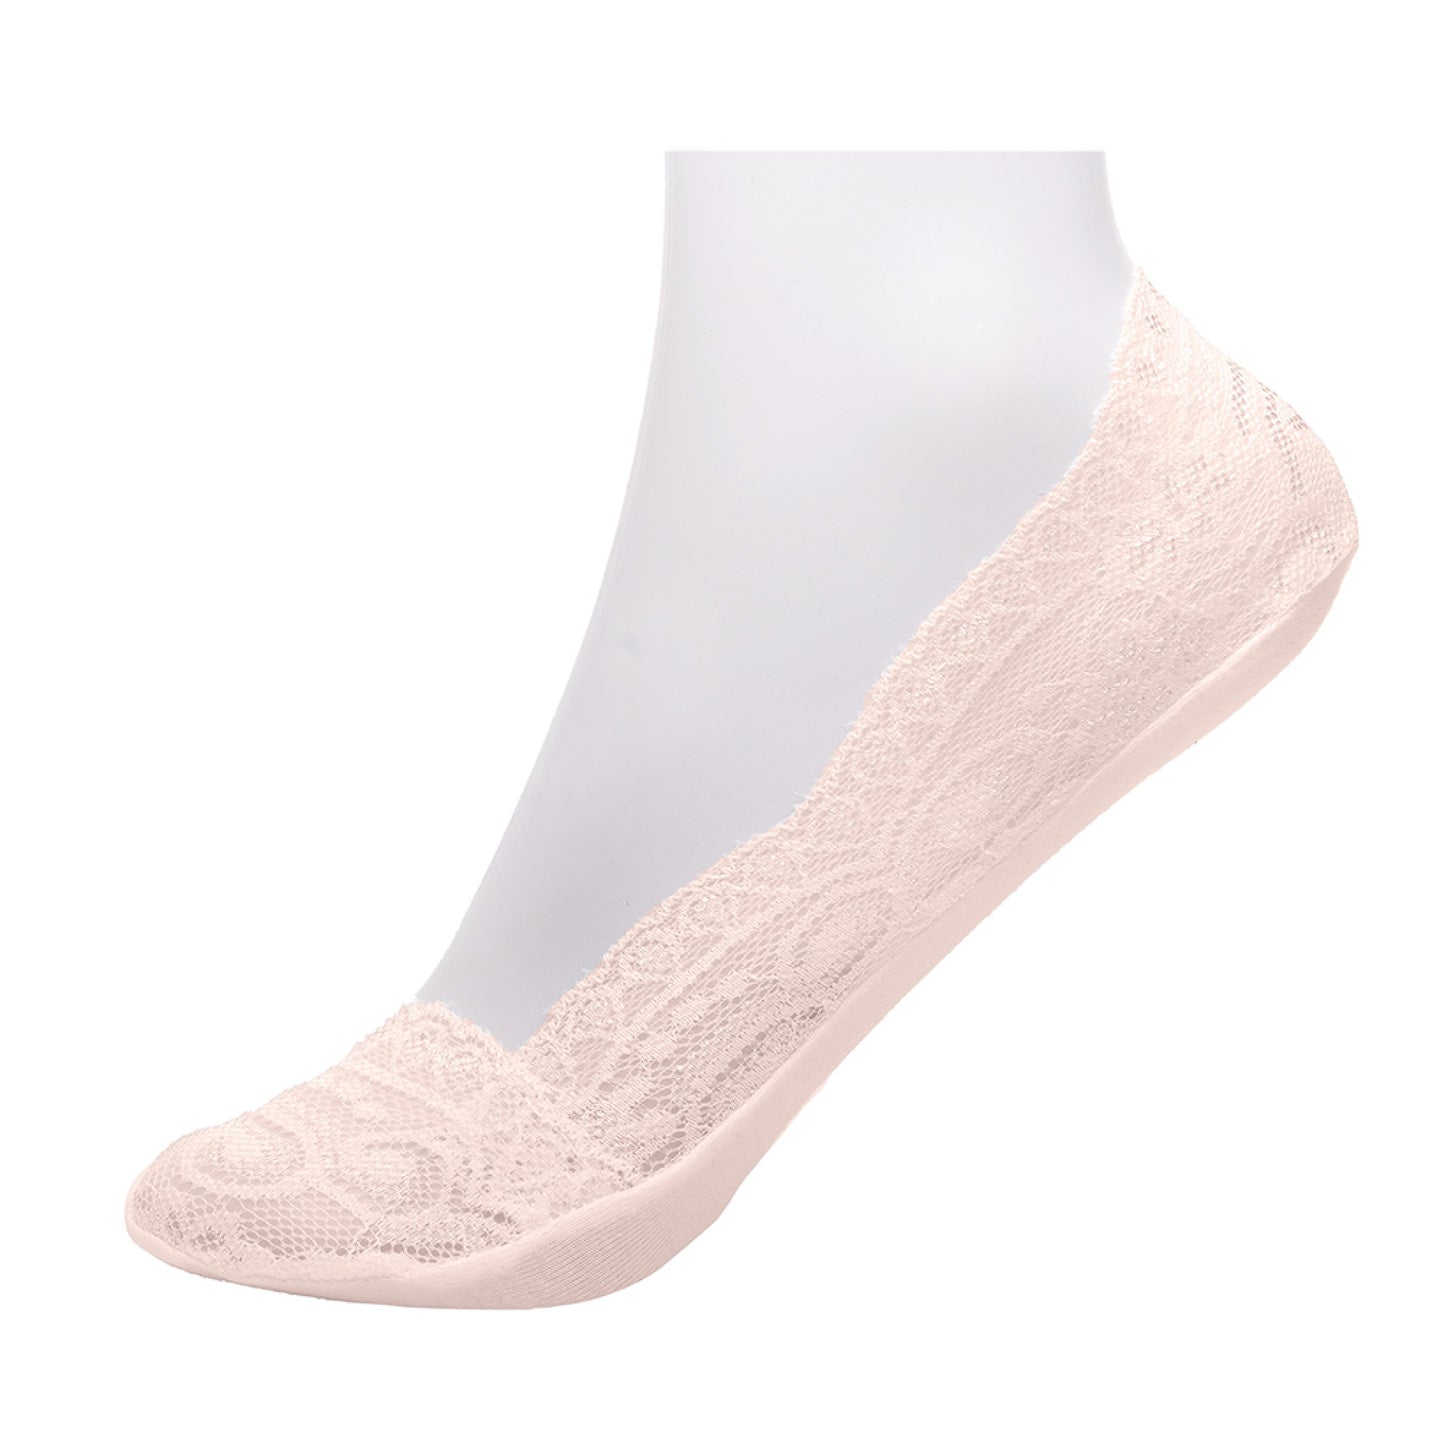 4 Pairs Ladies Cotton Rich Lace No-Show Invisible Shoe Liner Socks with Silicon Support